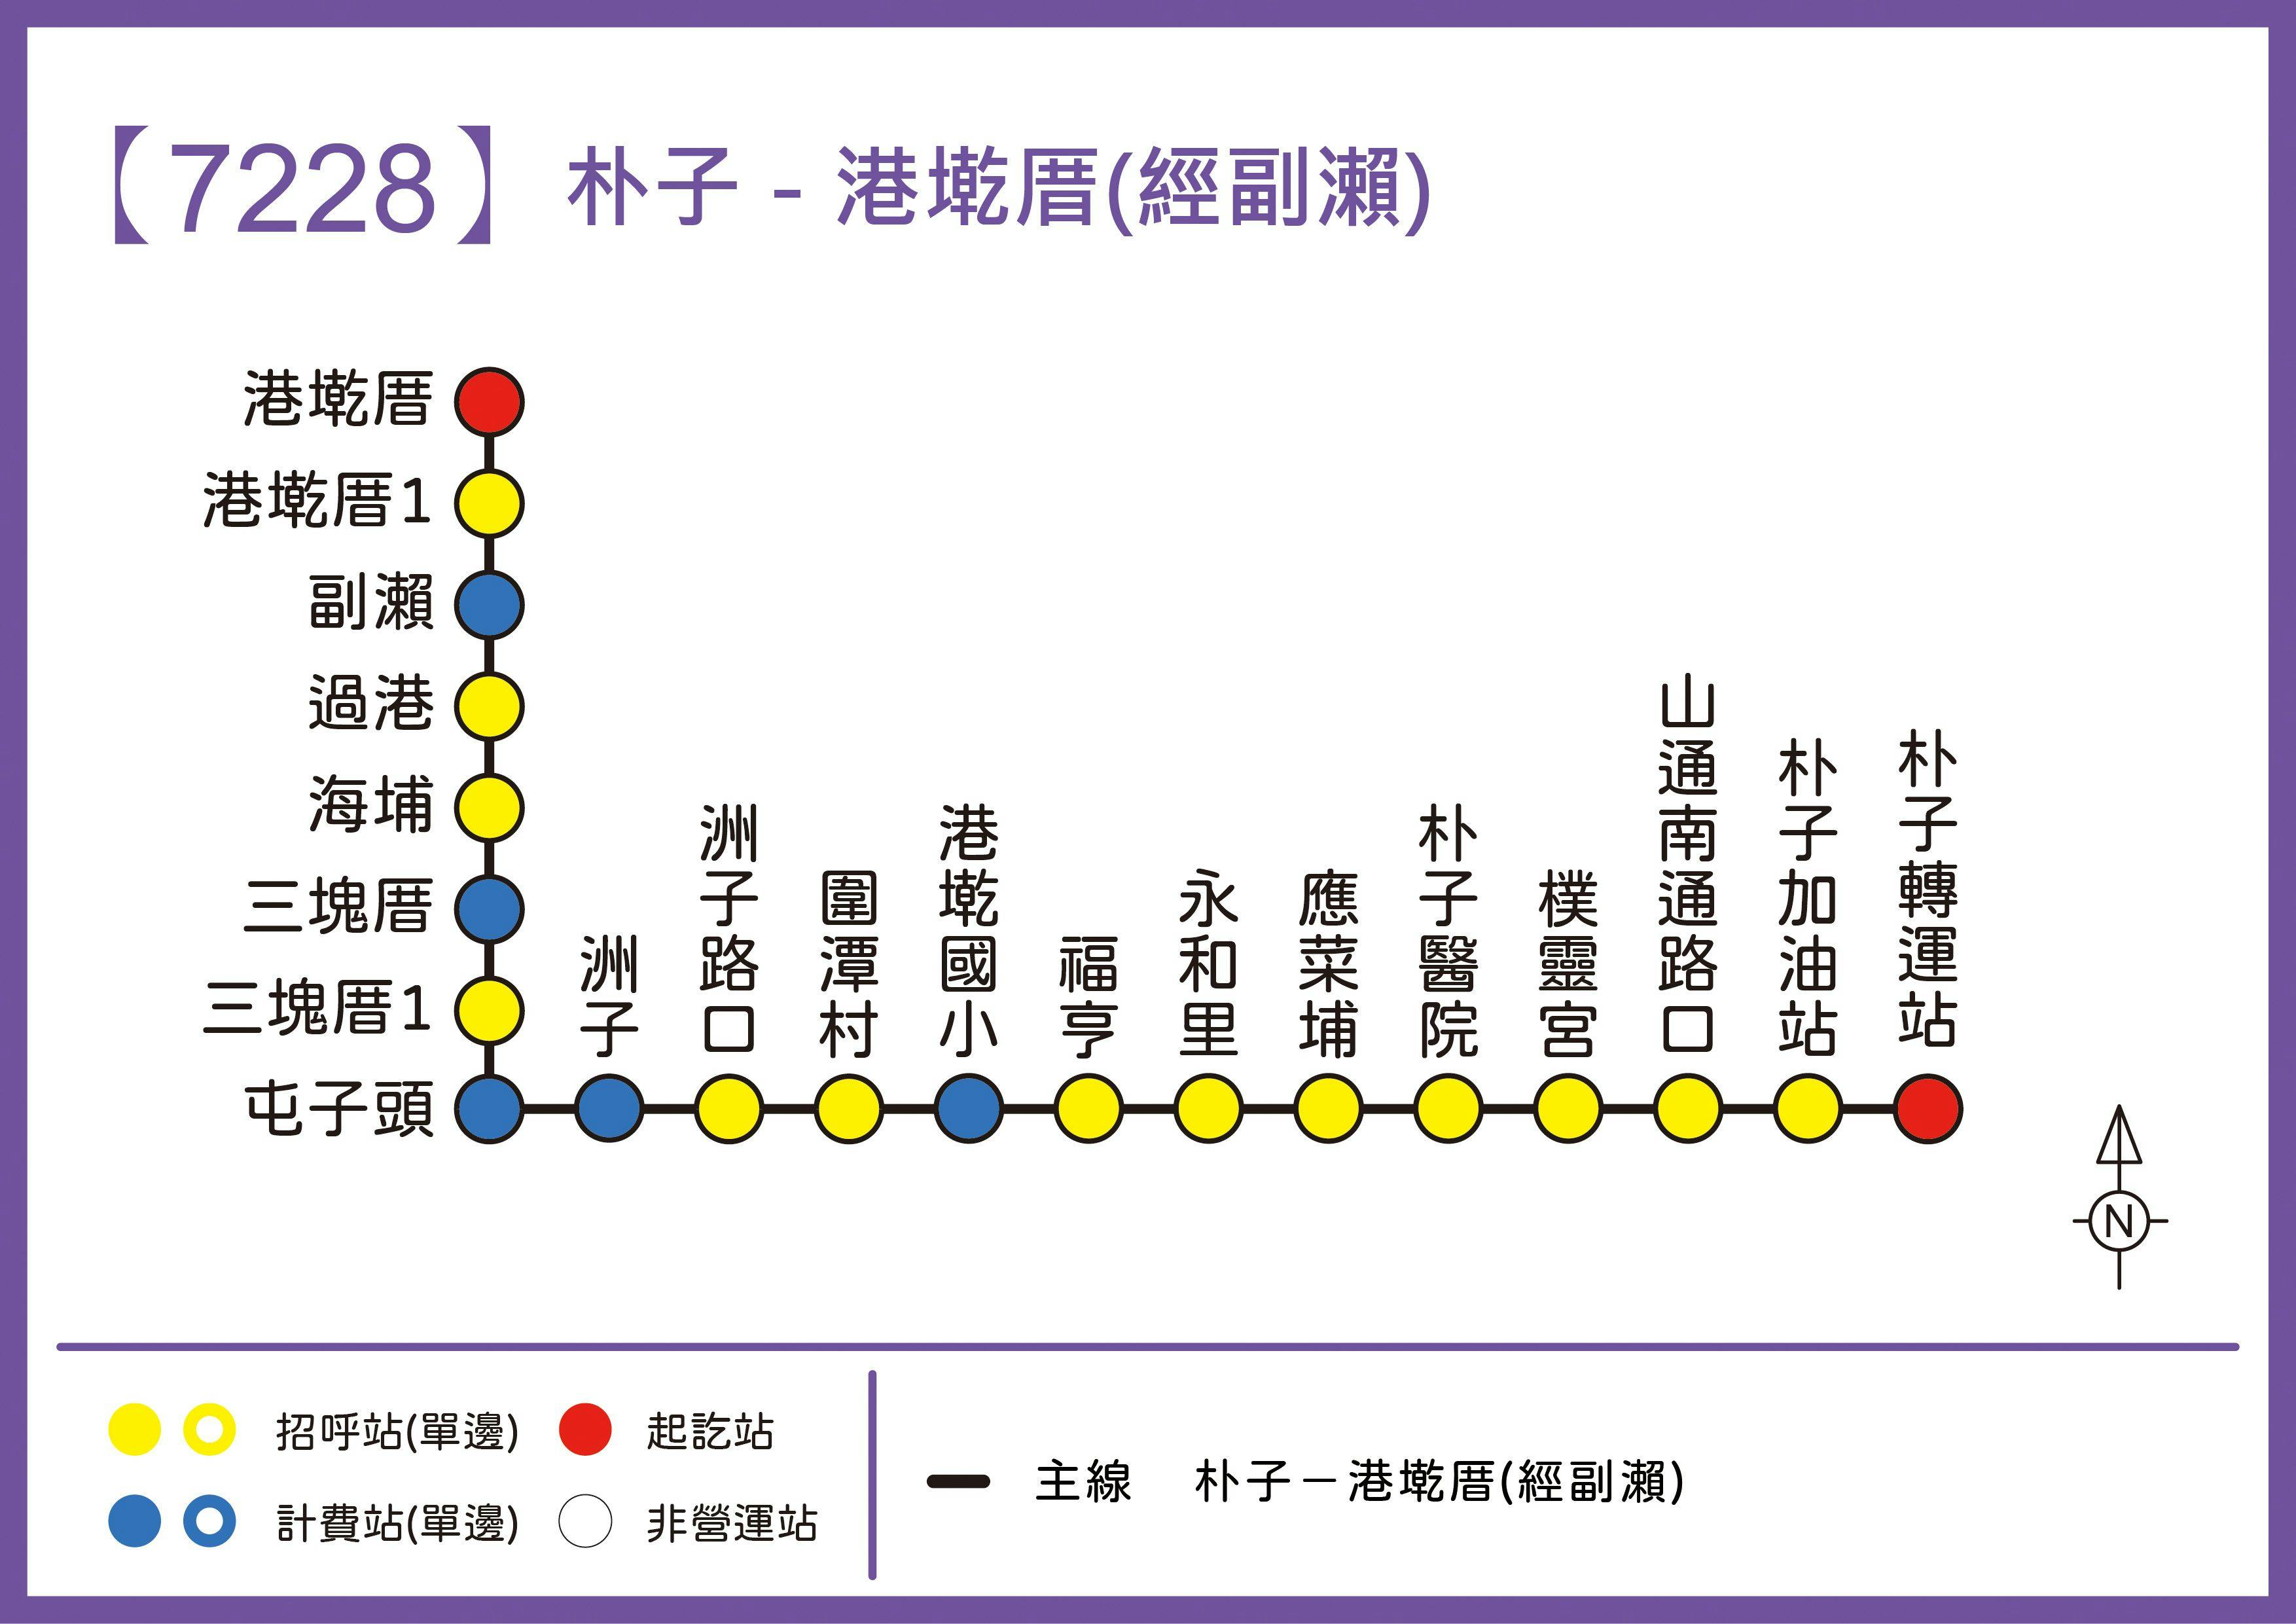 7228Route Map-Chiayi Bus